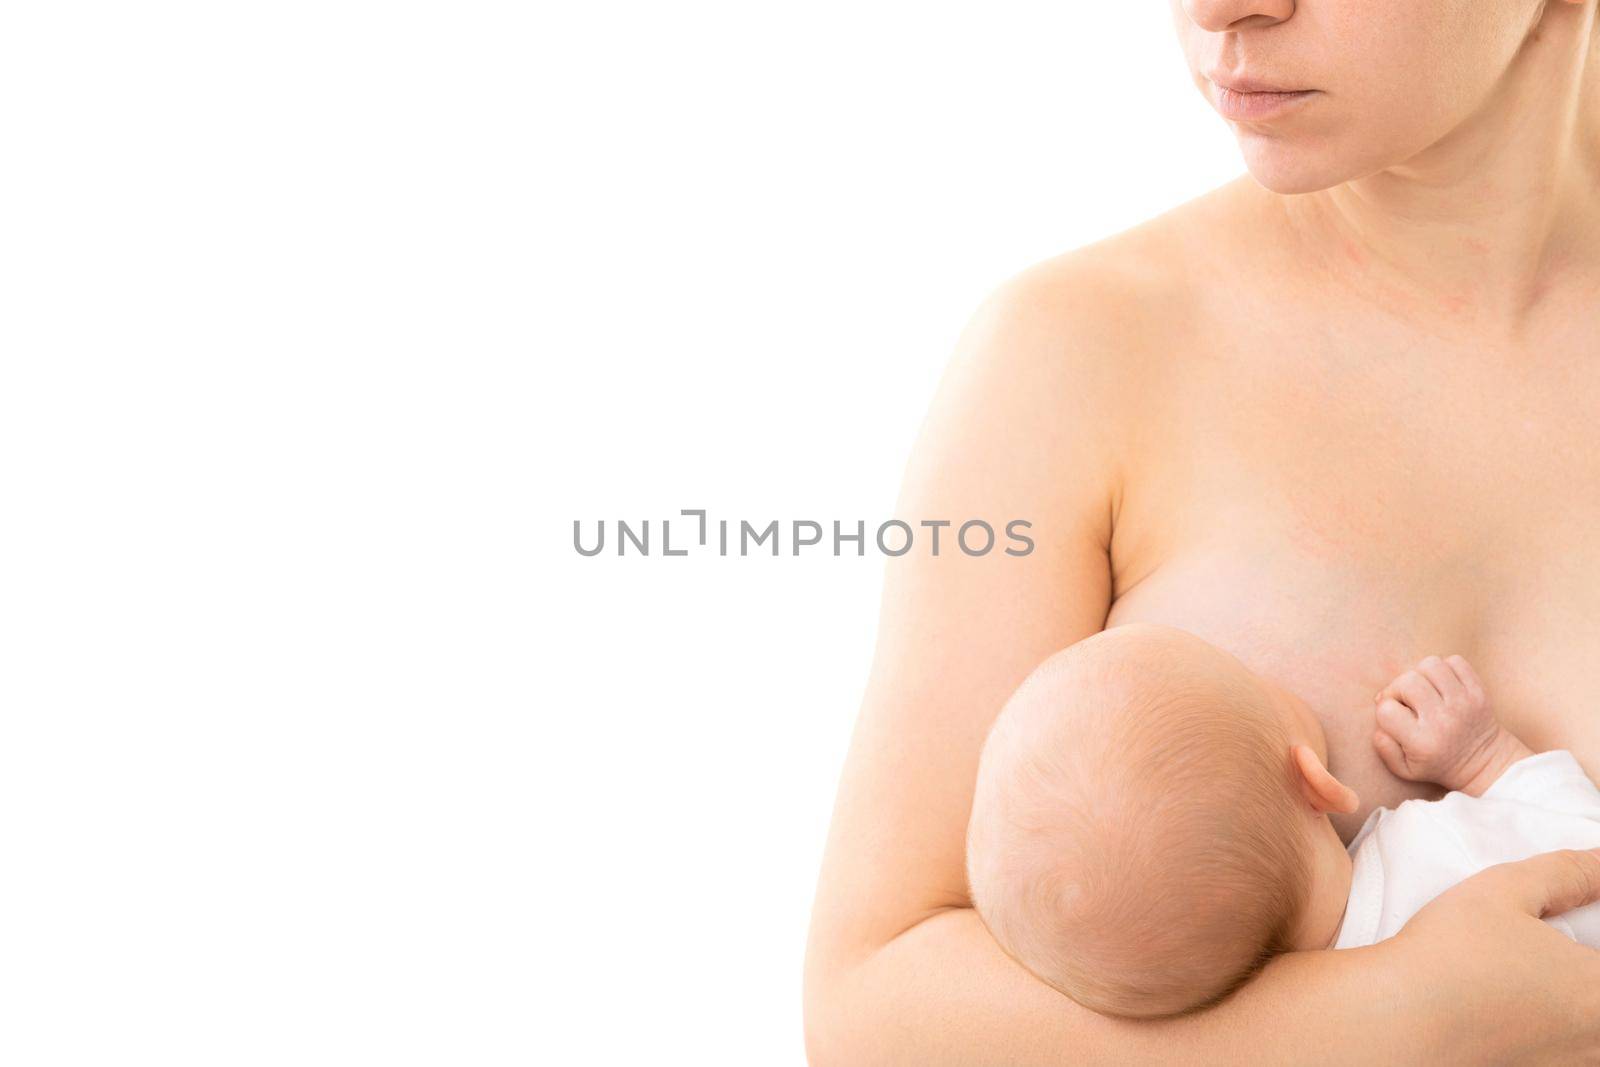 newborn baby takes mother's breast and drinks milk on a white background.